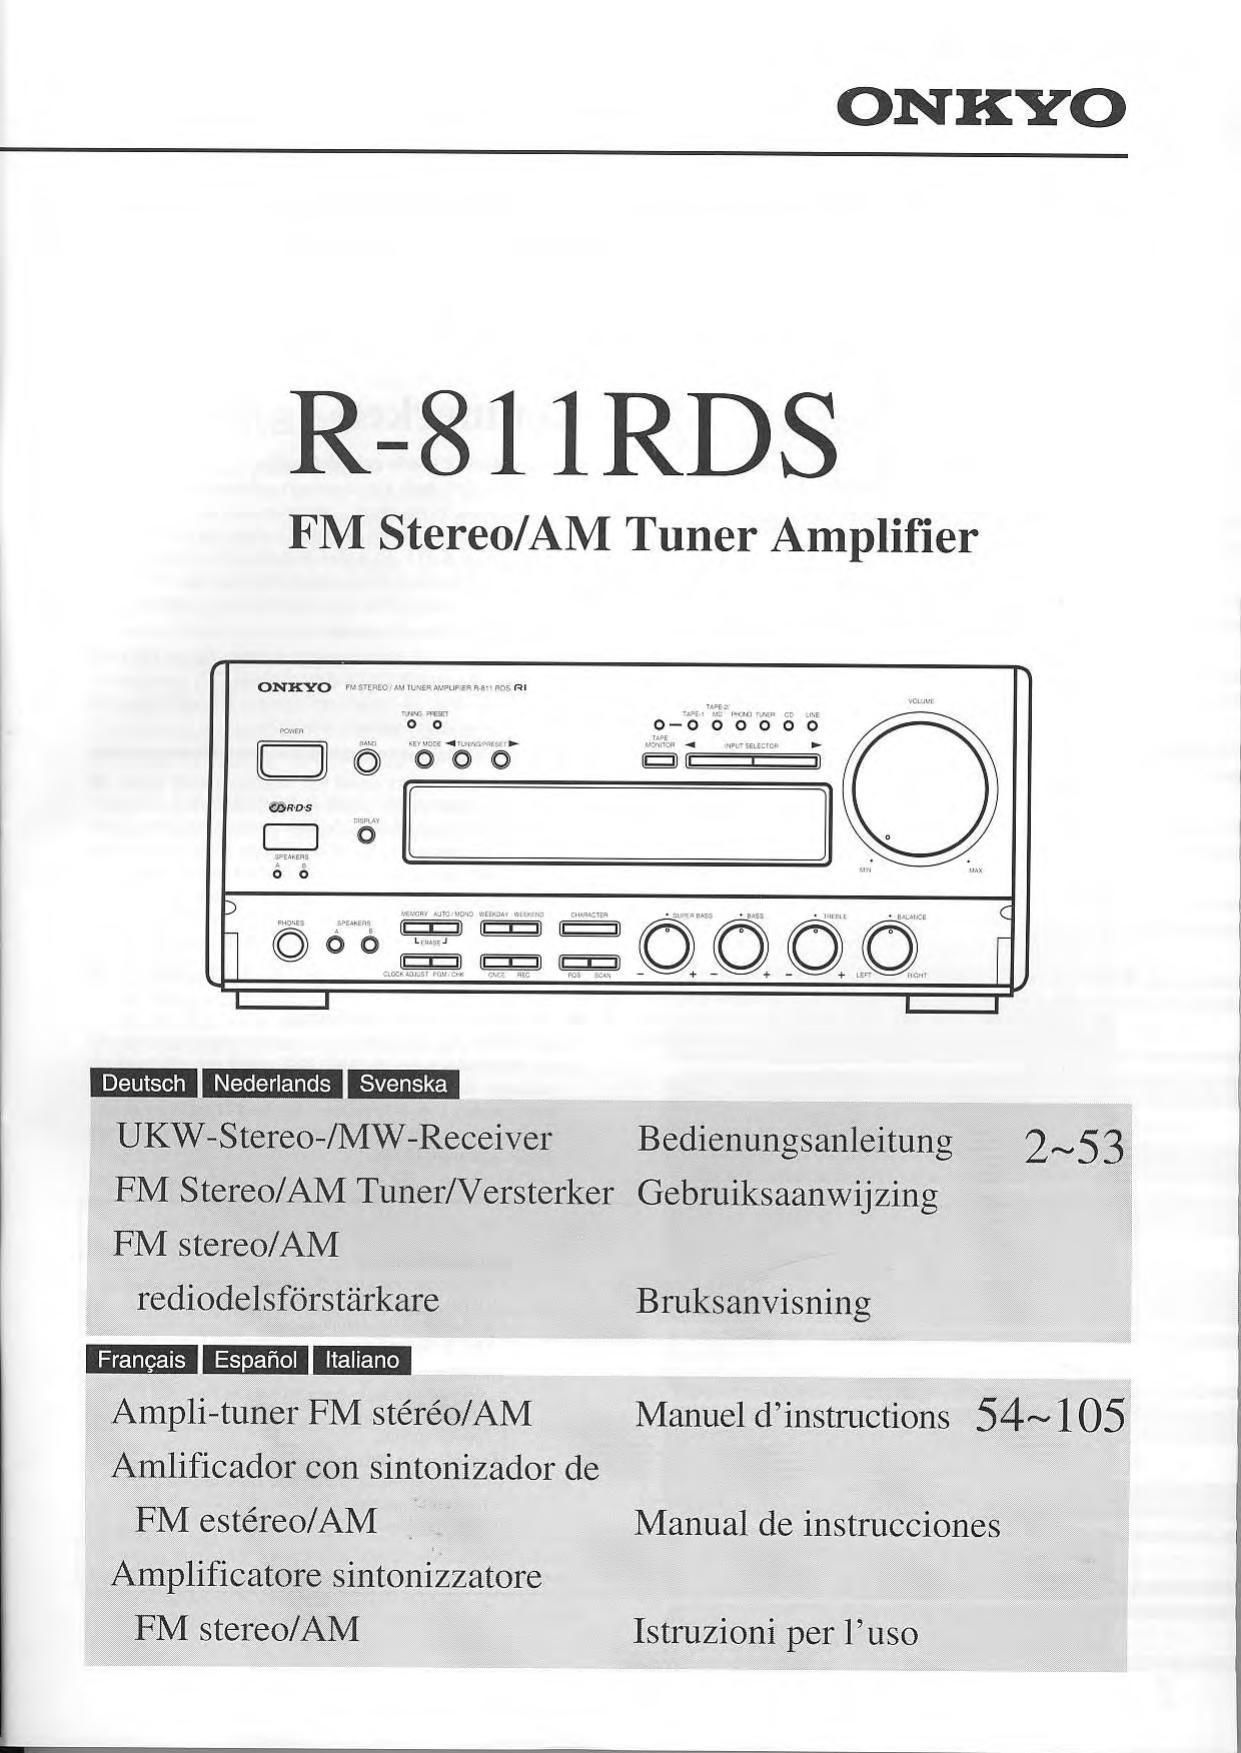 Onkyo R 811 RDS Owners Manual 2